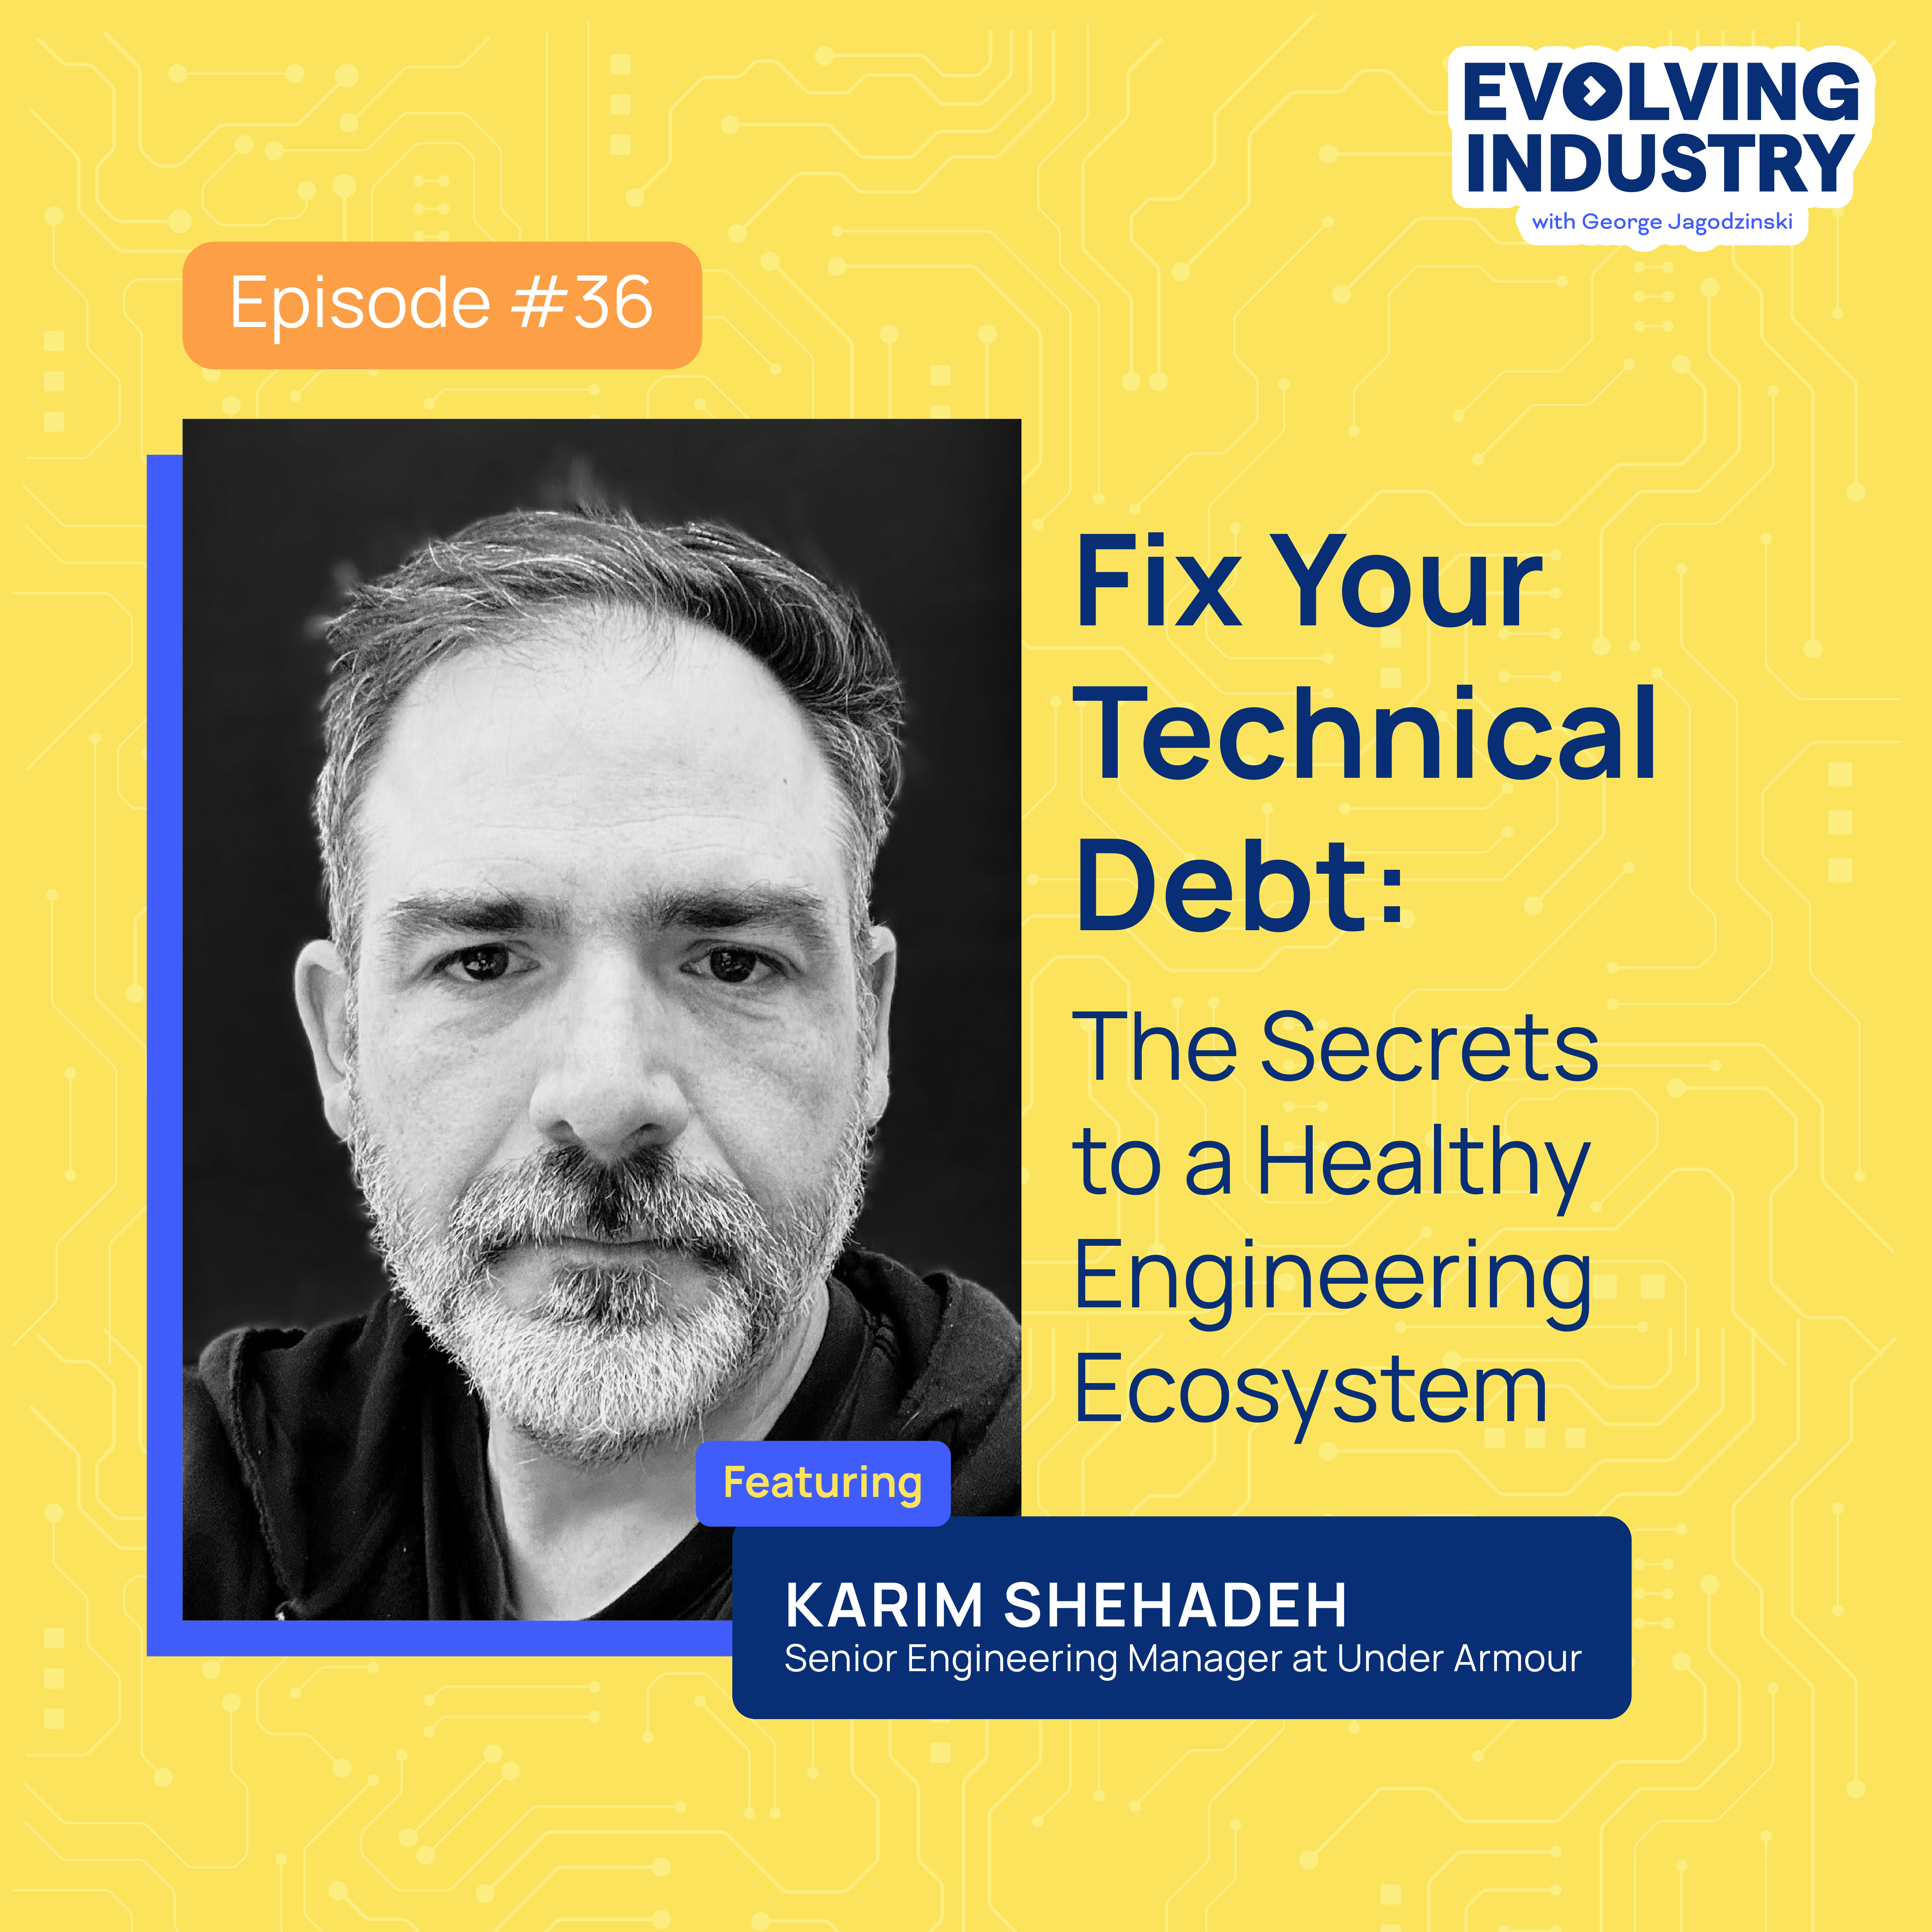 Fix Your Technical Debt: The Secrets to a Healthy Engineering Ecosystem